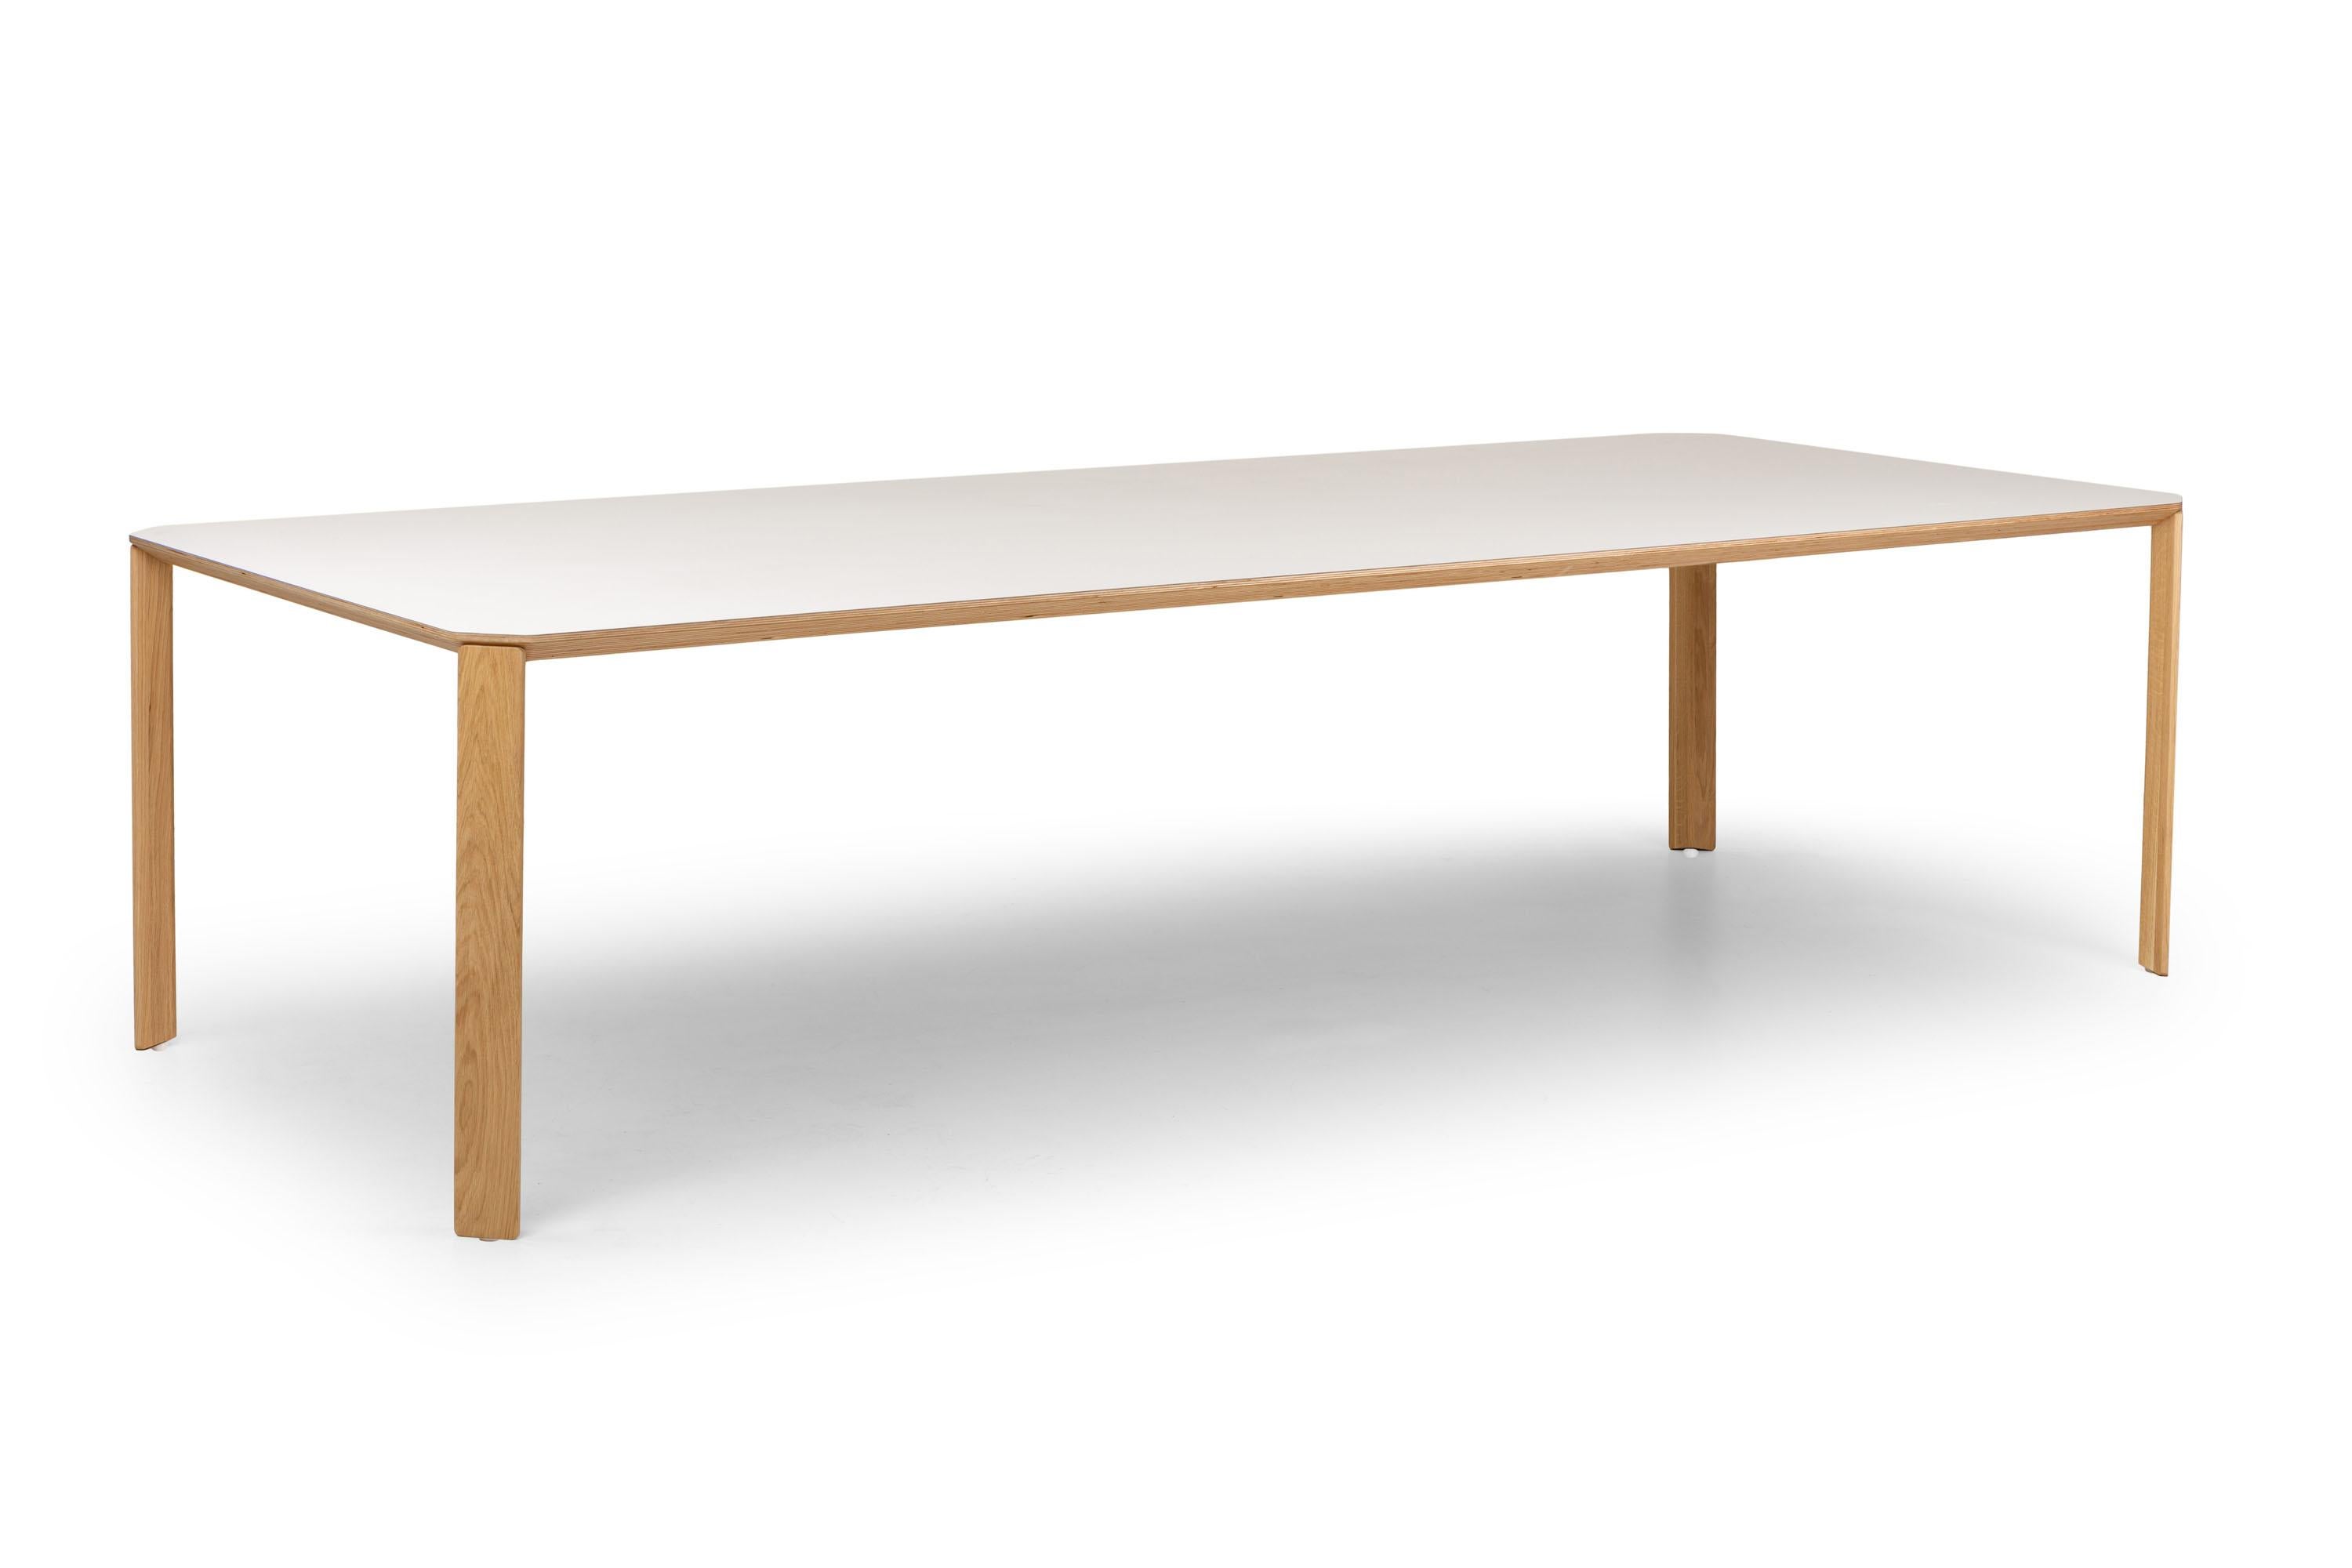 The new family of tables defined by an innovative connection system between the parts (table-top and legs) that is completely hidden. 
The table design allows an expansive solution ranging from small tables to large meeting tables. The solid wood